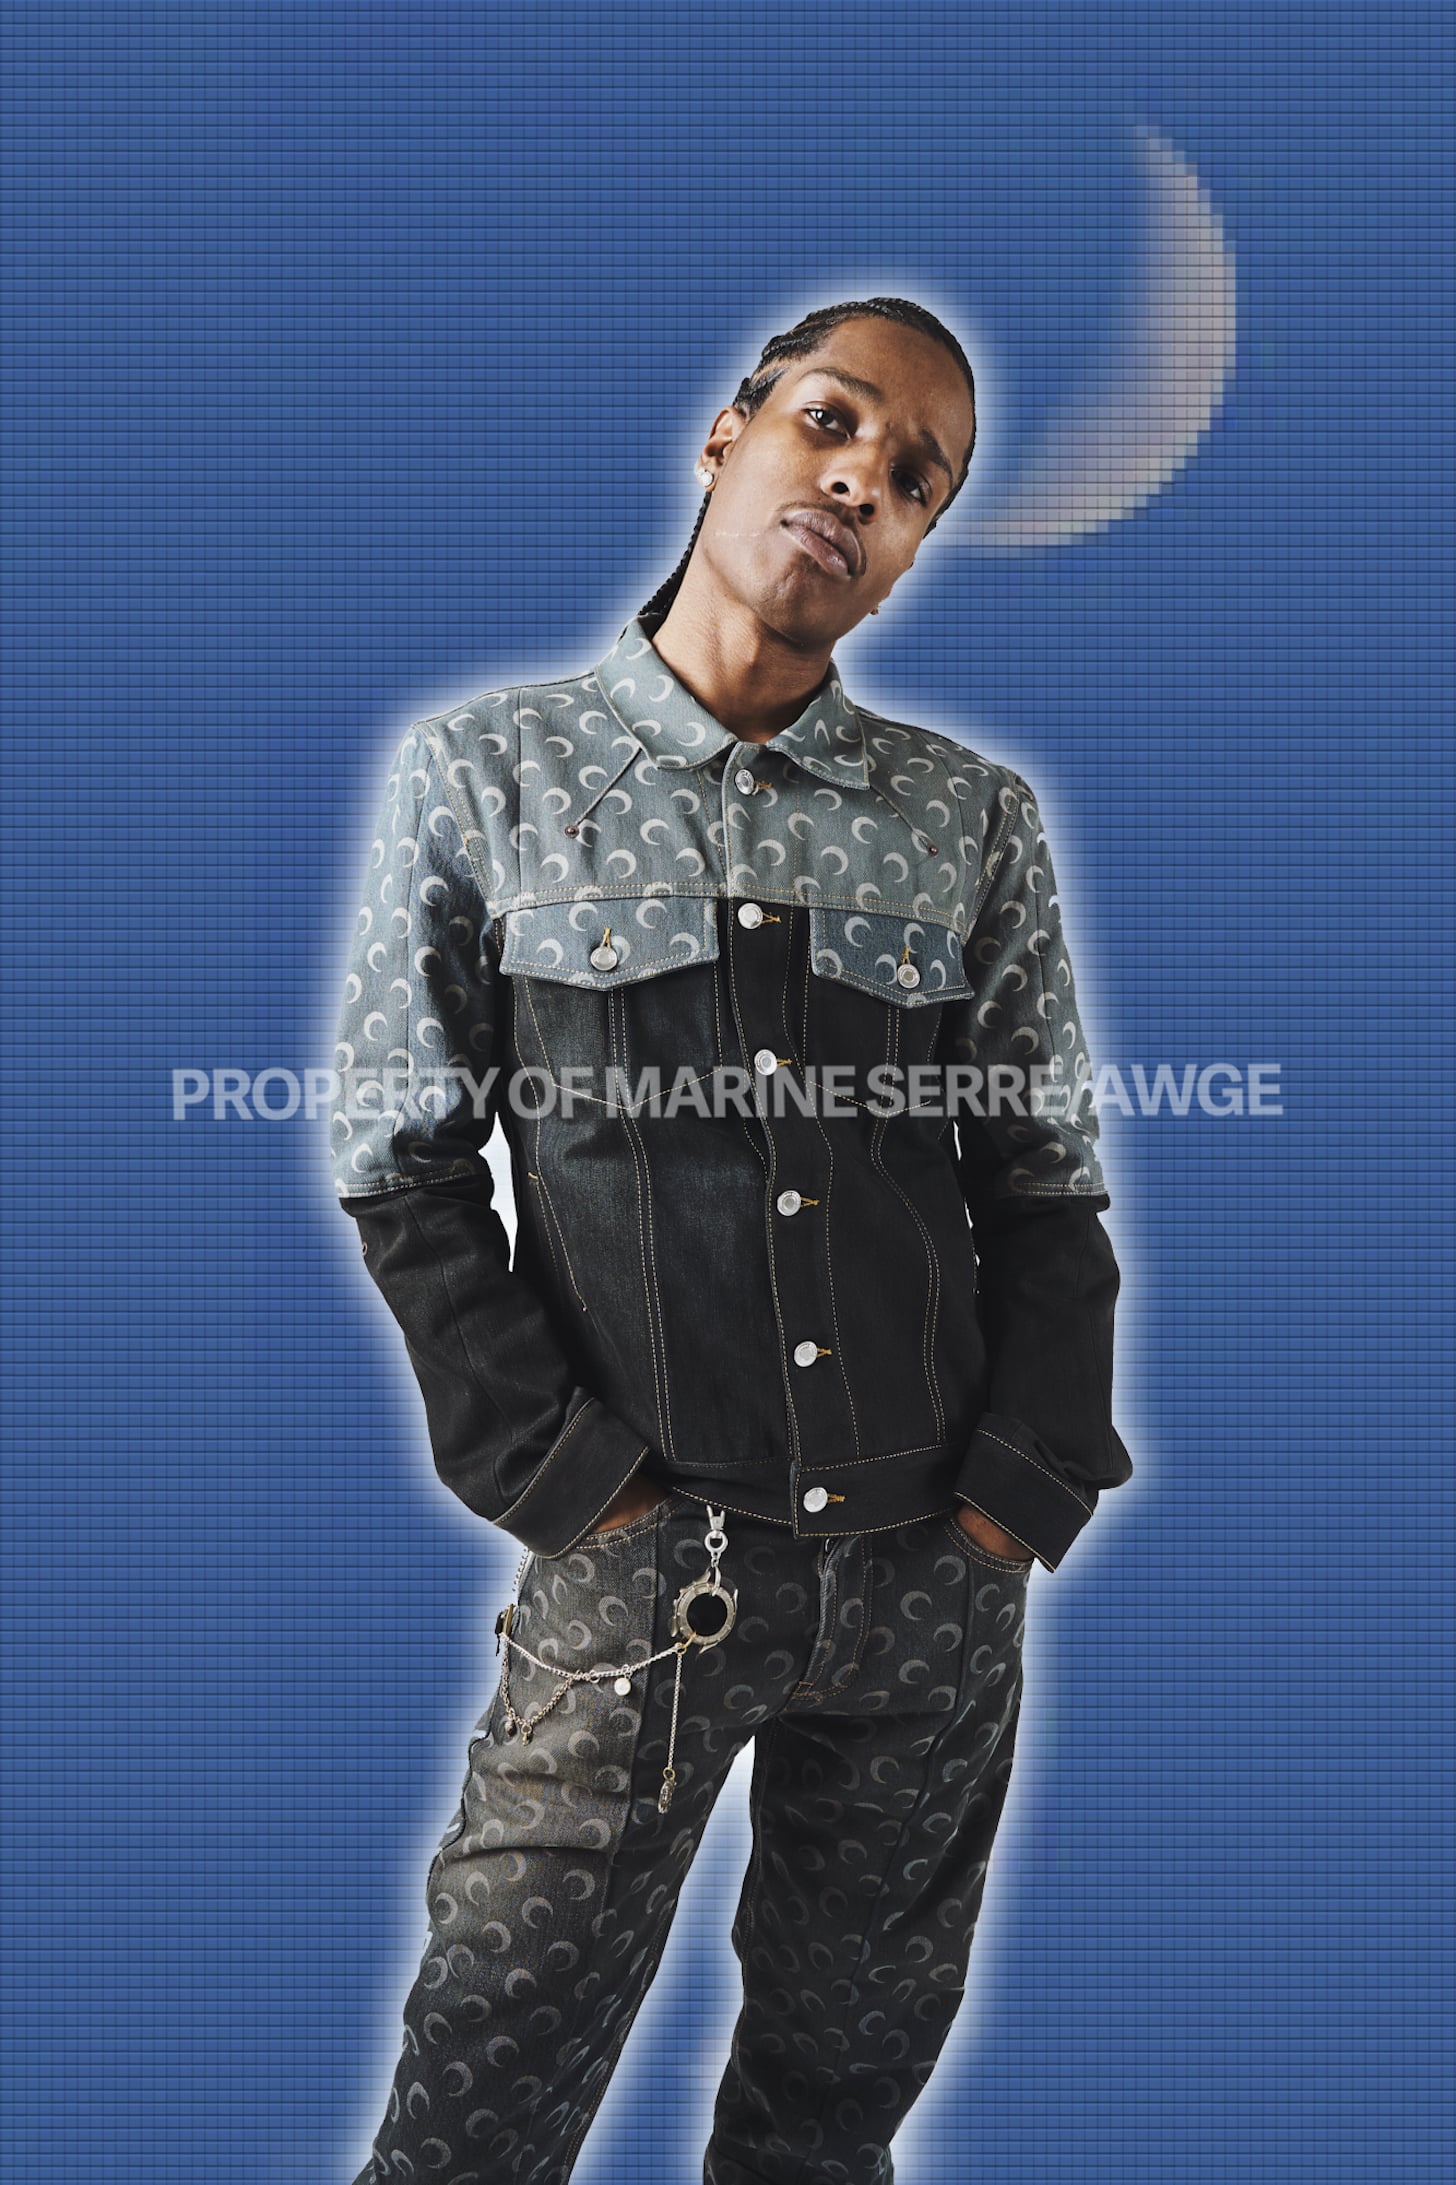 Marine Serre and A$AP Rocky's AWGE Clothing Collaboration